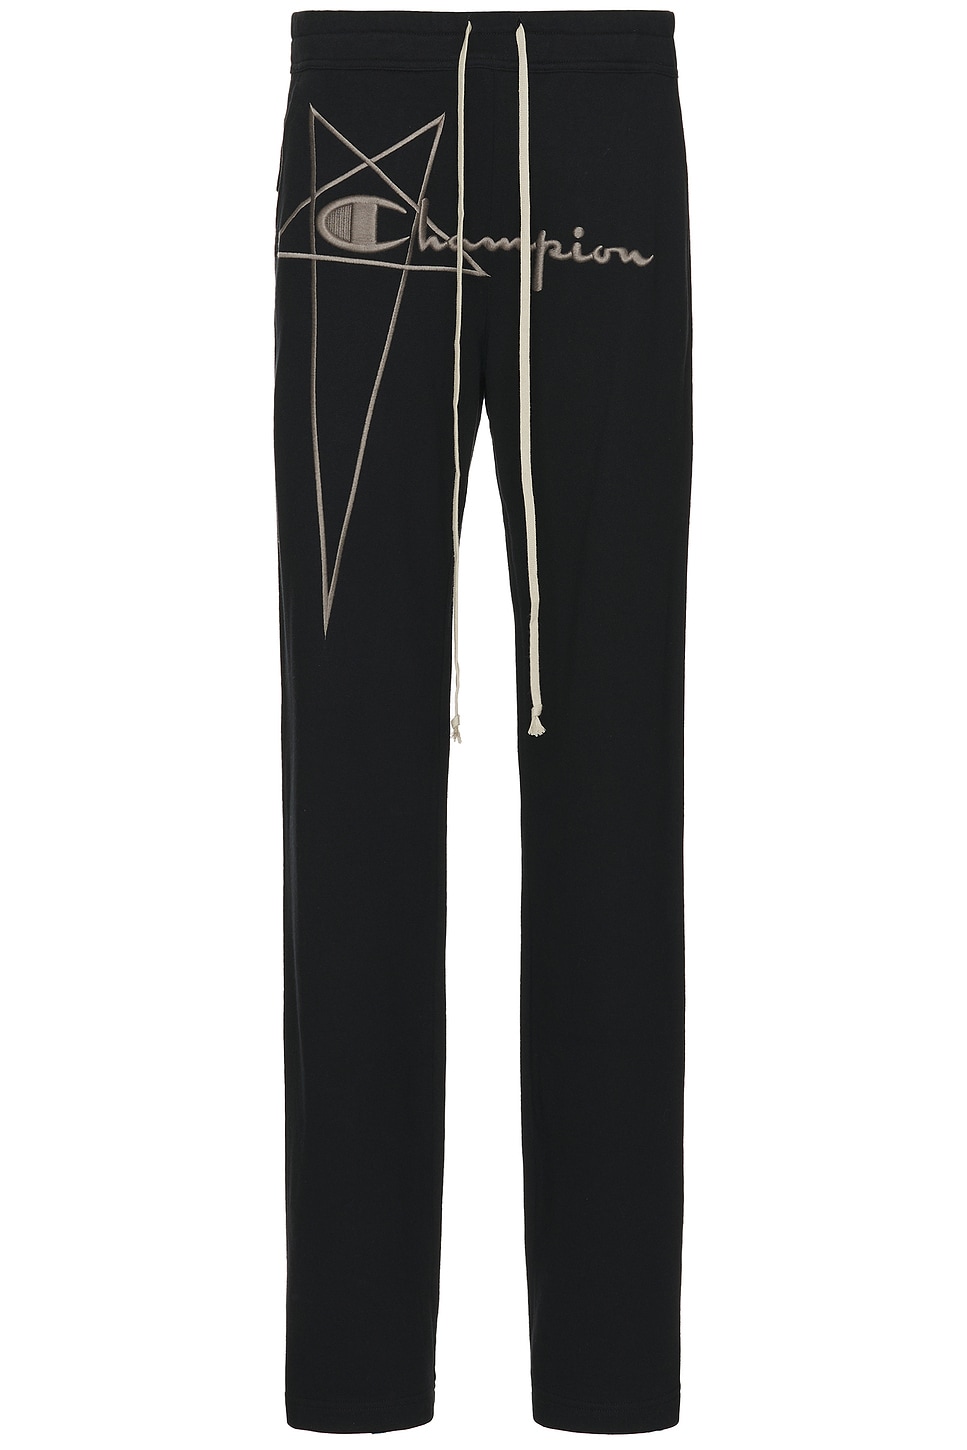 Image 1 of Rick Owens X Champion Dietrich Drawstring Pant in Black & Natural